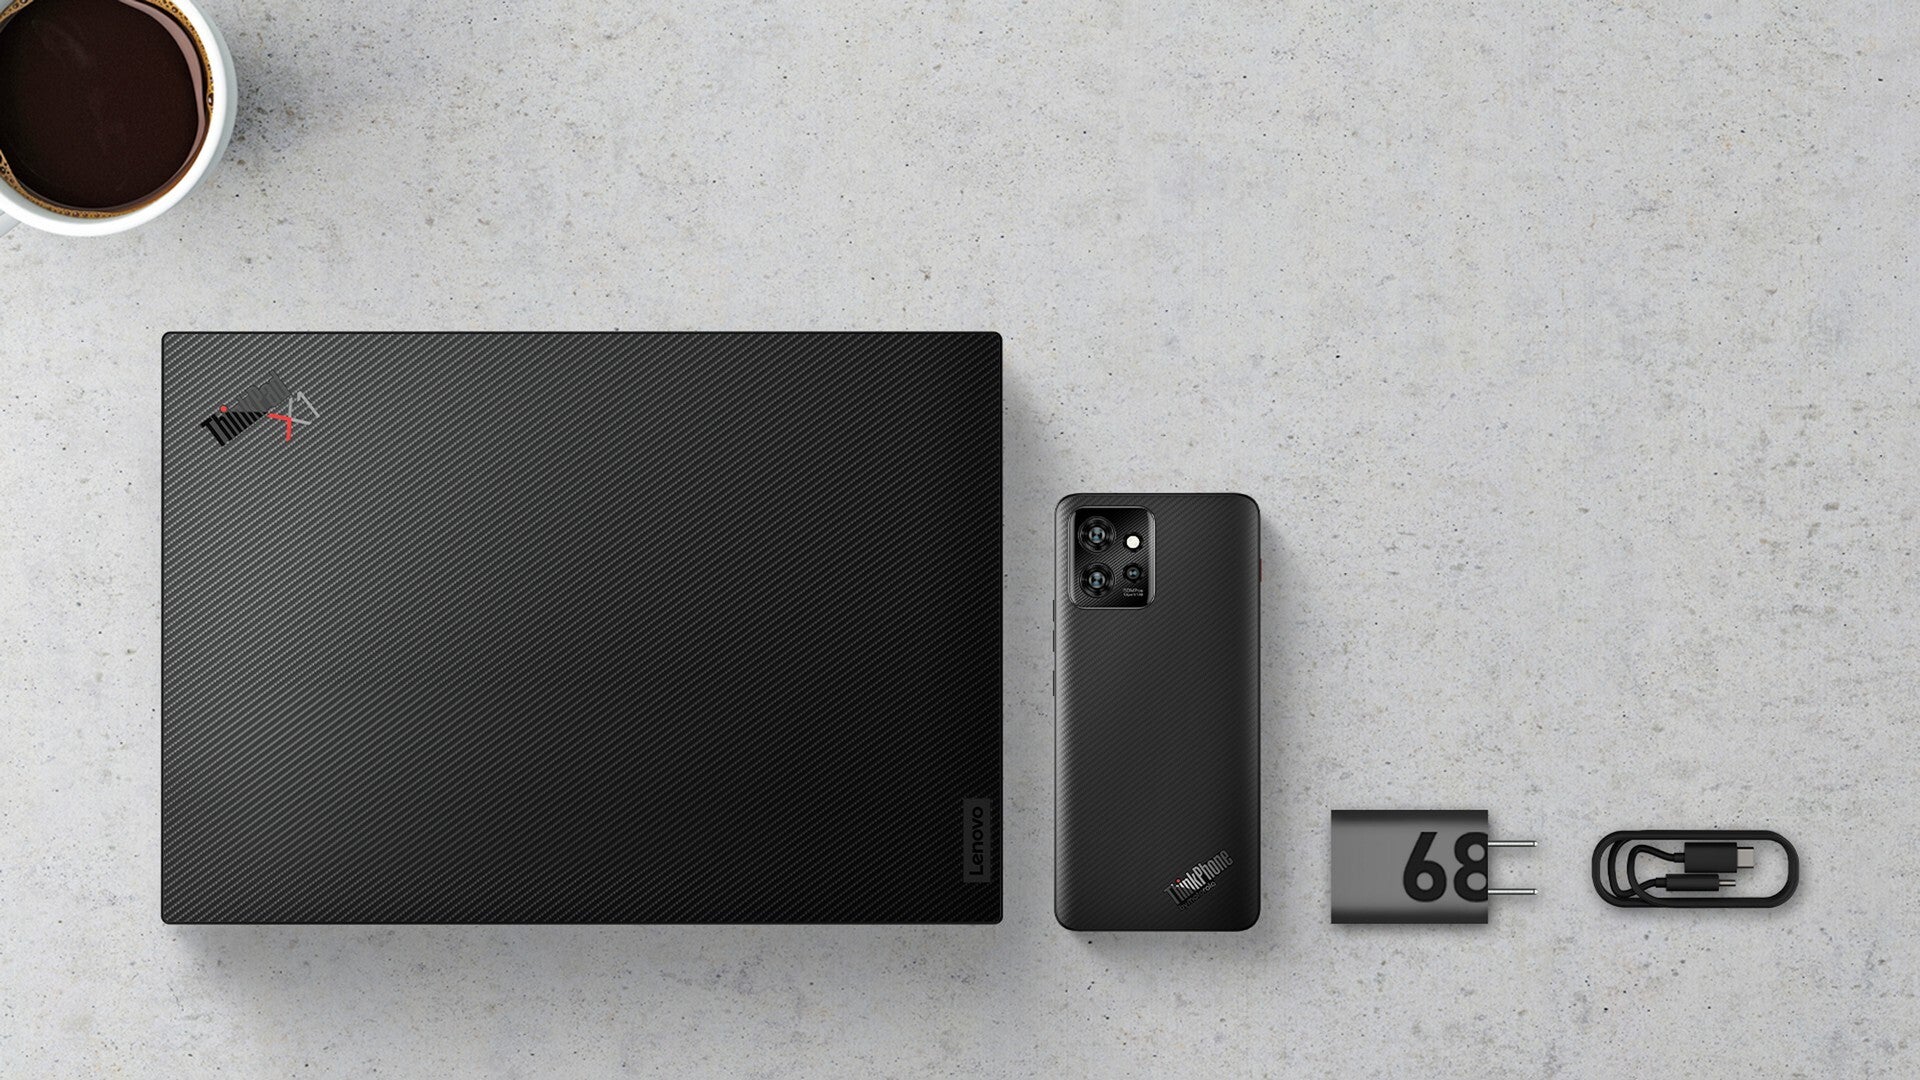 Lenovo ThinkPhone, its 68W power adapter, and the ThinkPad X1 Carbon Gen 11. - Motorola announces its first jab at a business-centric phone: the Lenovo ThinkPhone